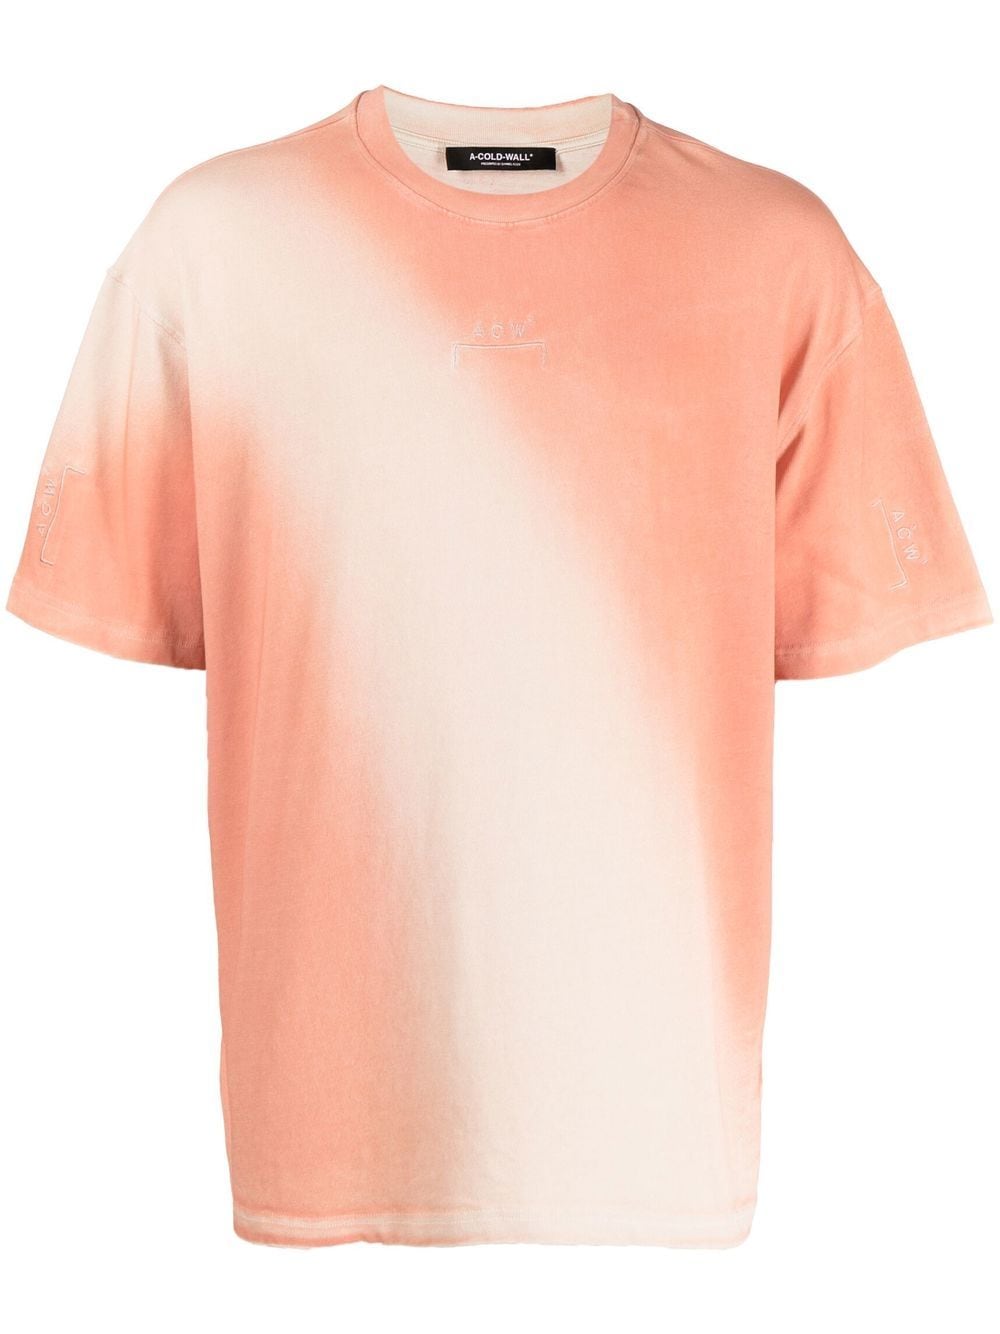 A-COLD-WALL* embroidered-logo gradient T-shirt - Orange von A-COLD-WALL*